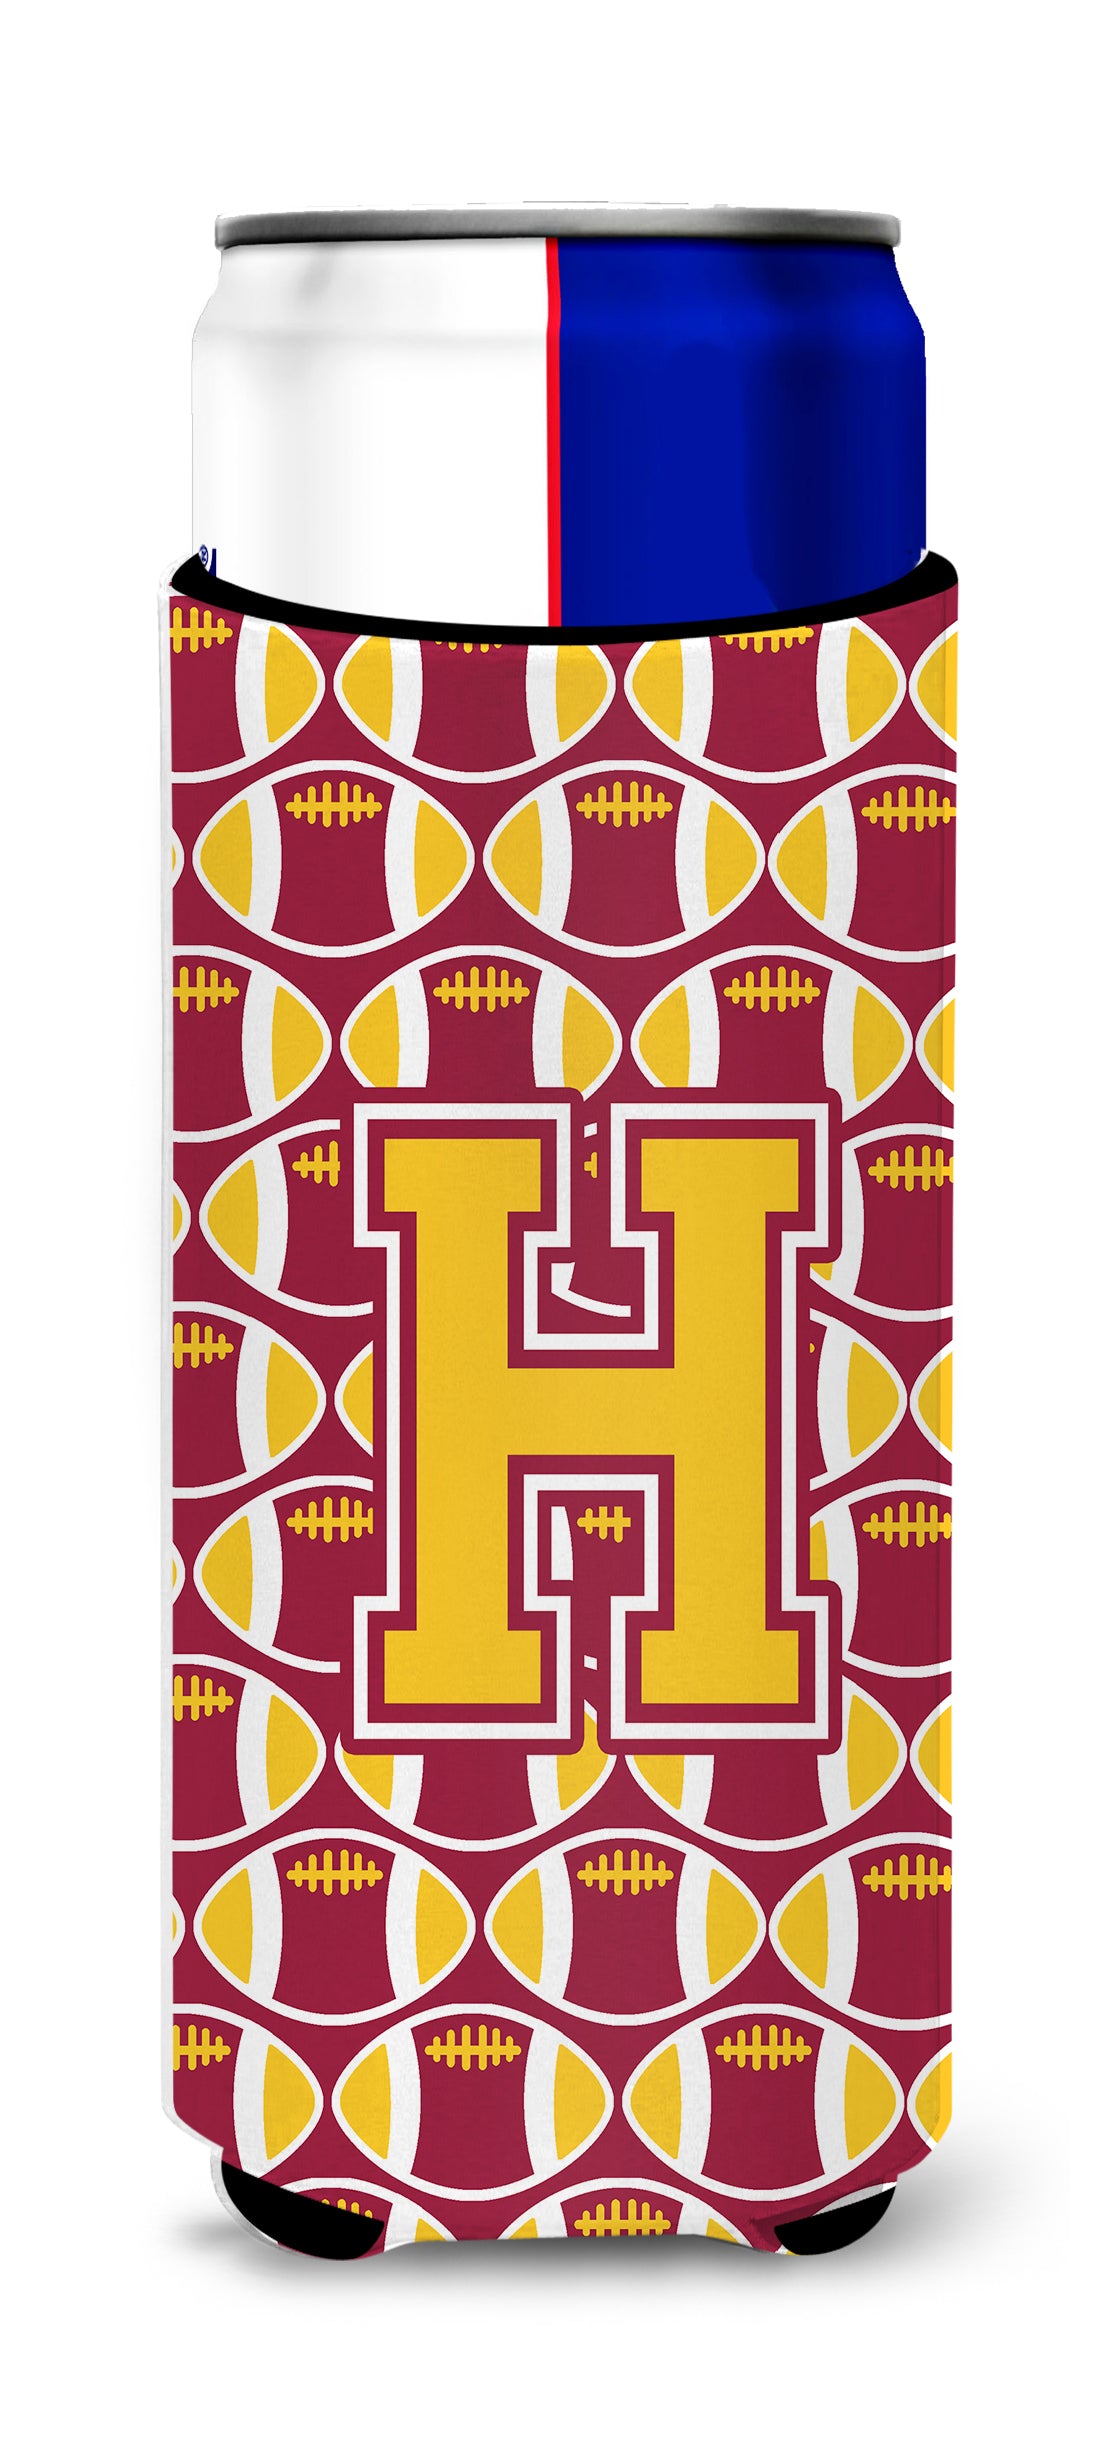 Letter H Football Maroon and Gold Ultra Beverage Insulators for slim cans CJ1081-HMUK.